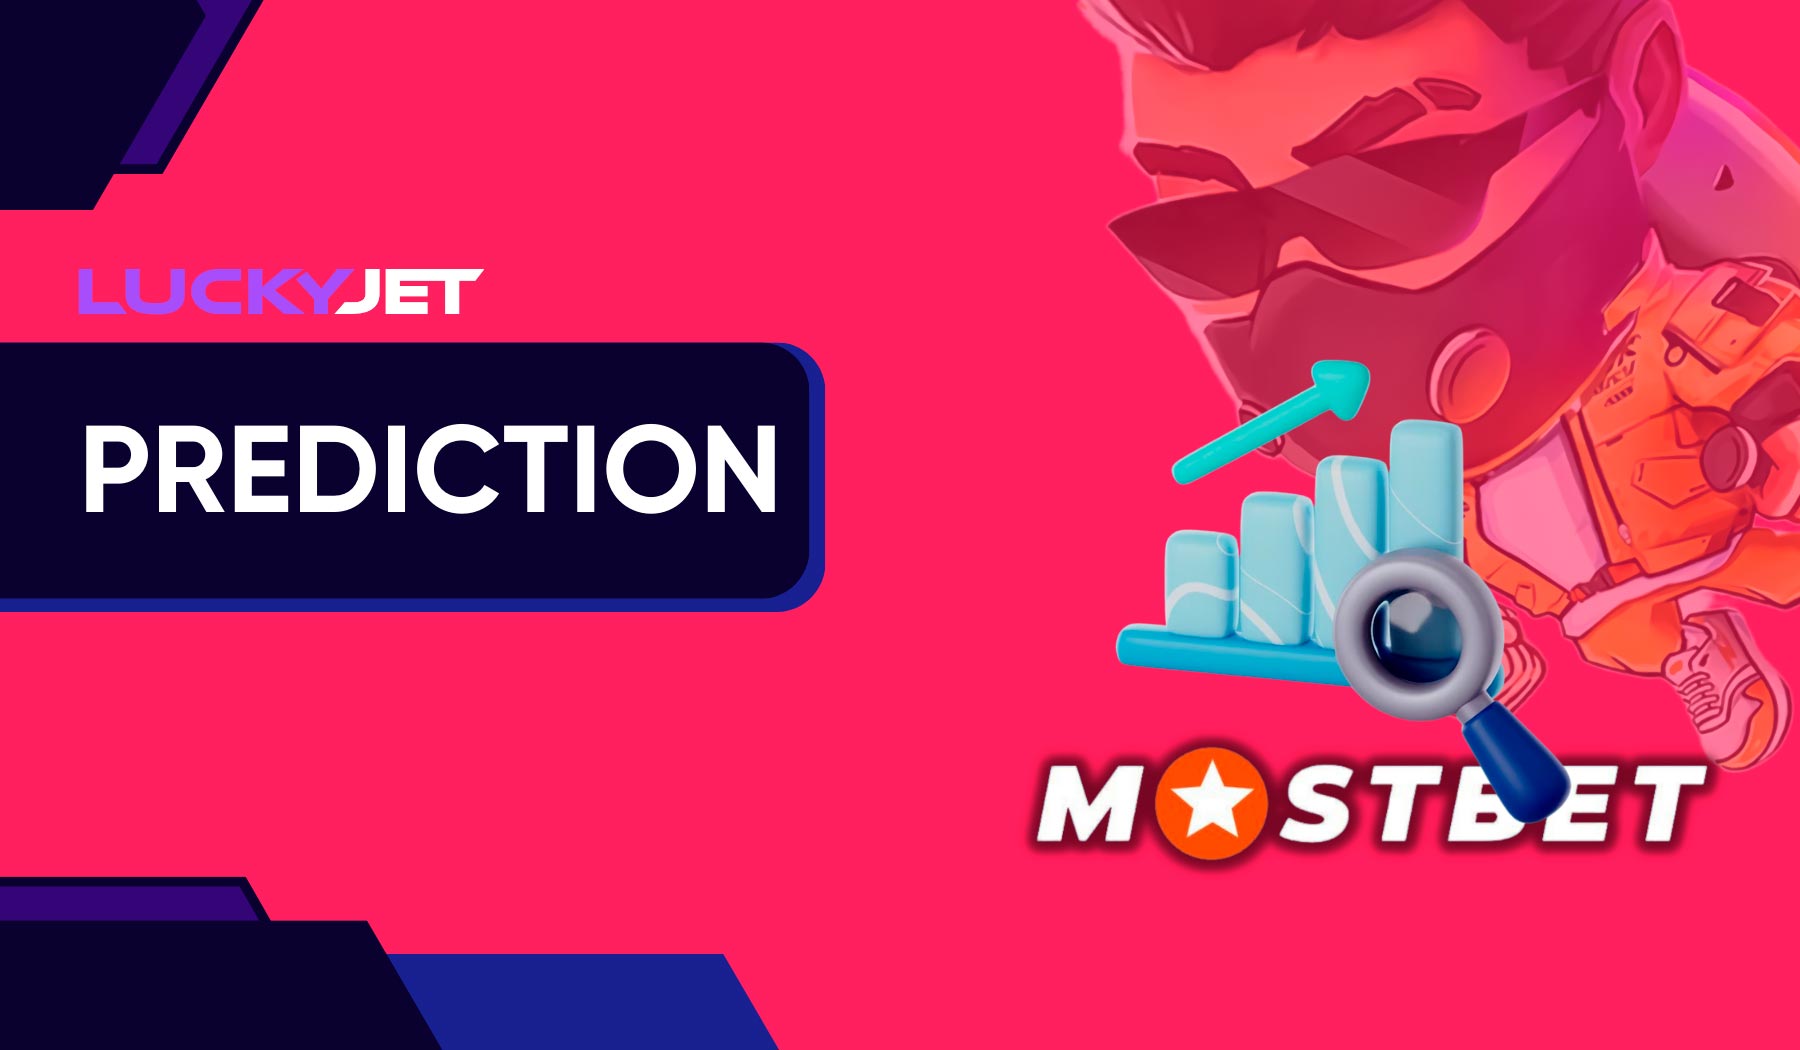 Is it possible to predict the game tactics in Mostbet Lucky Jet